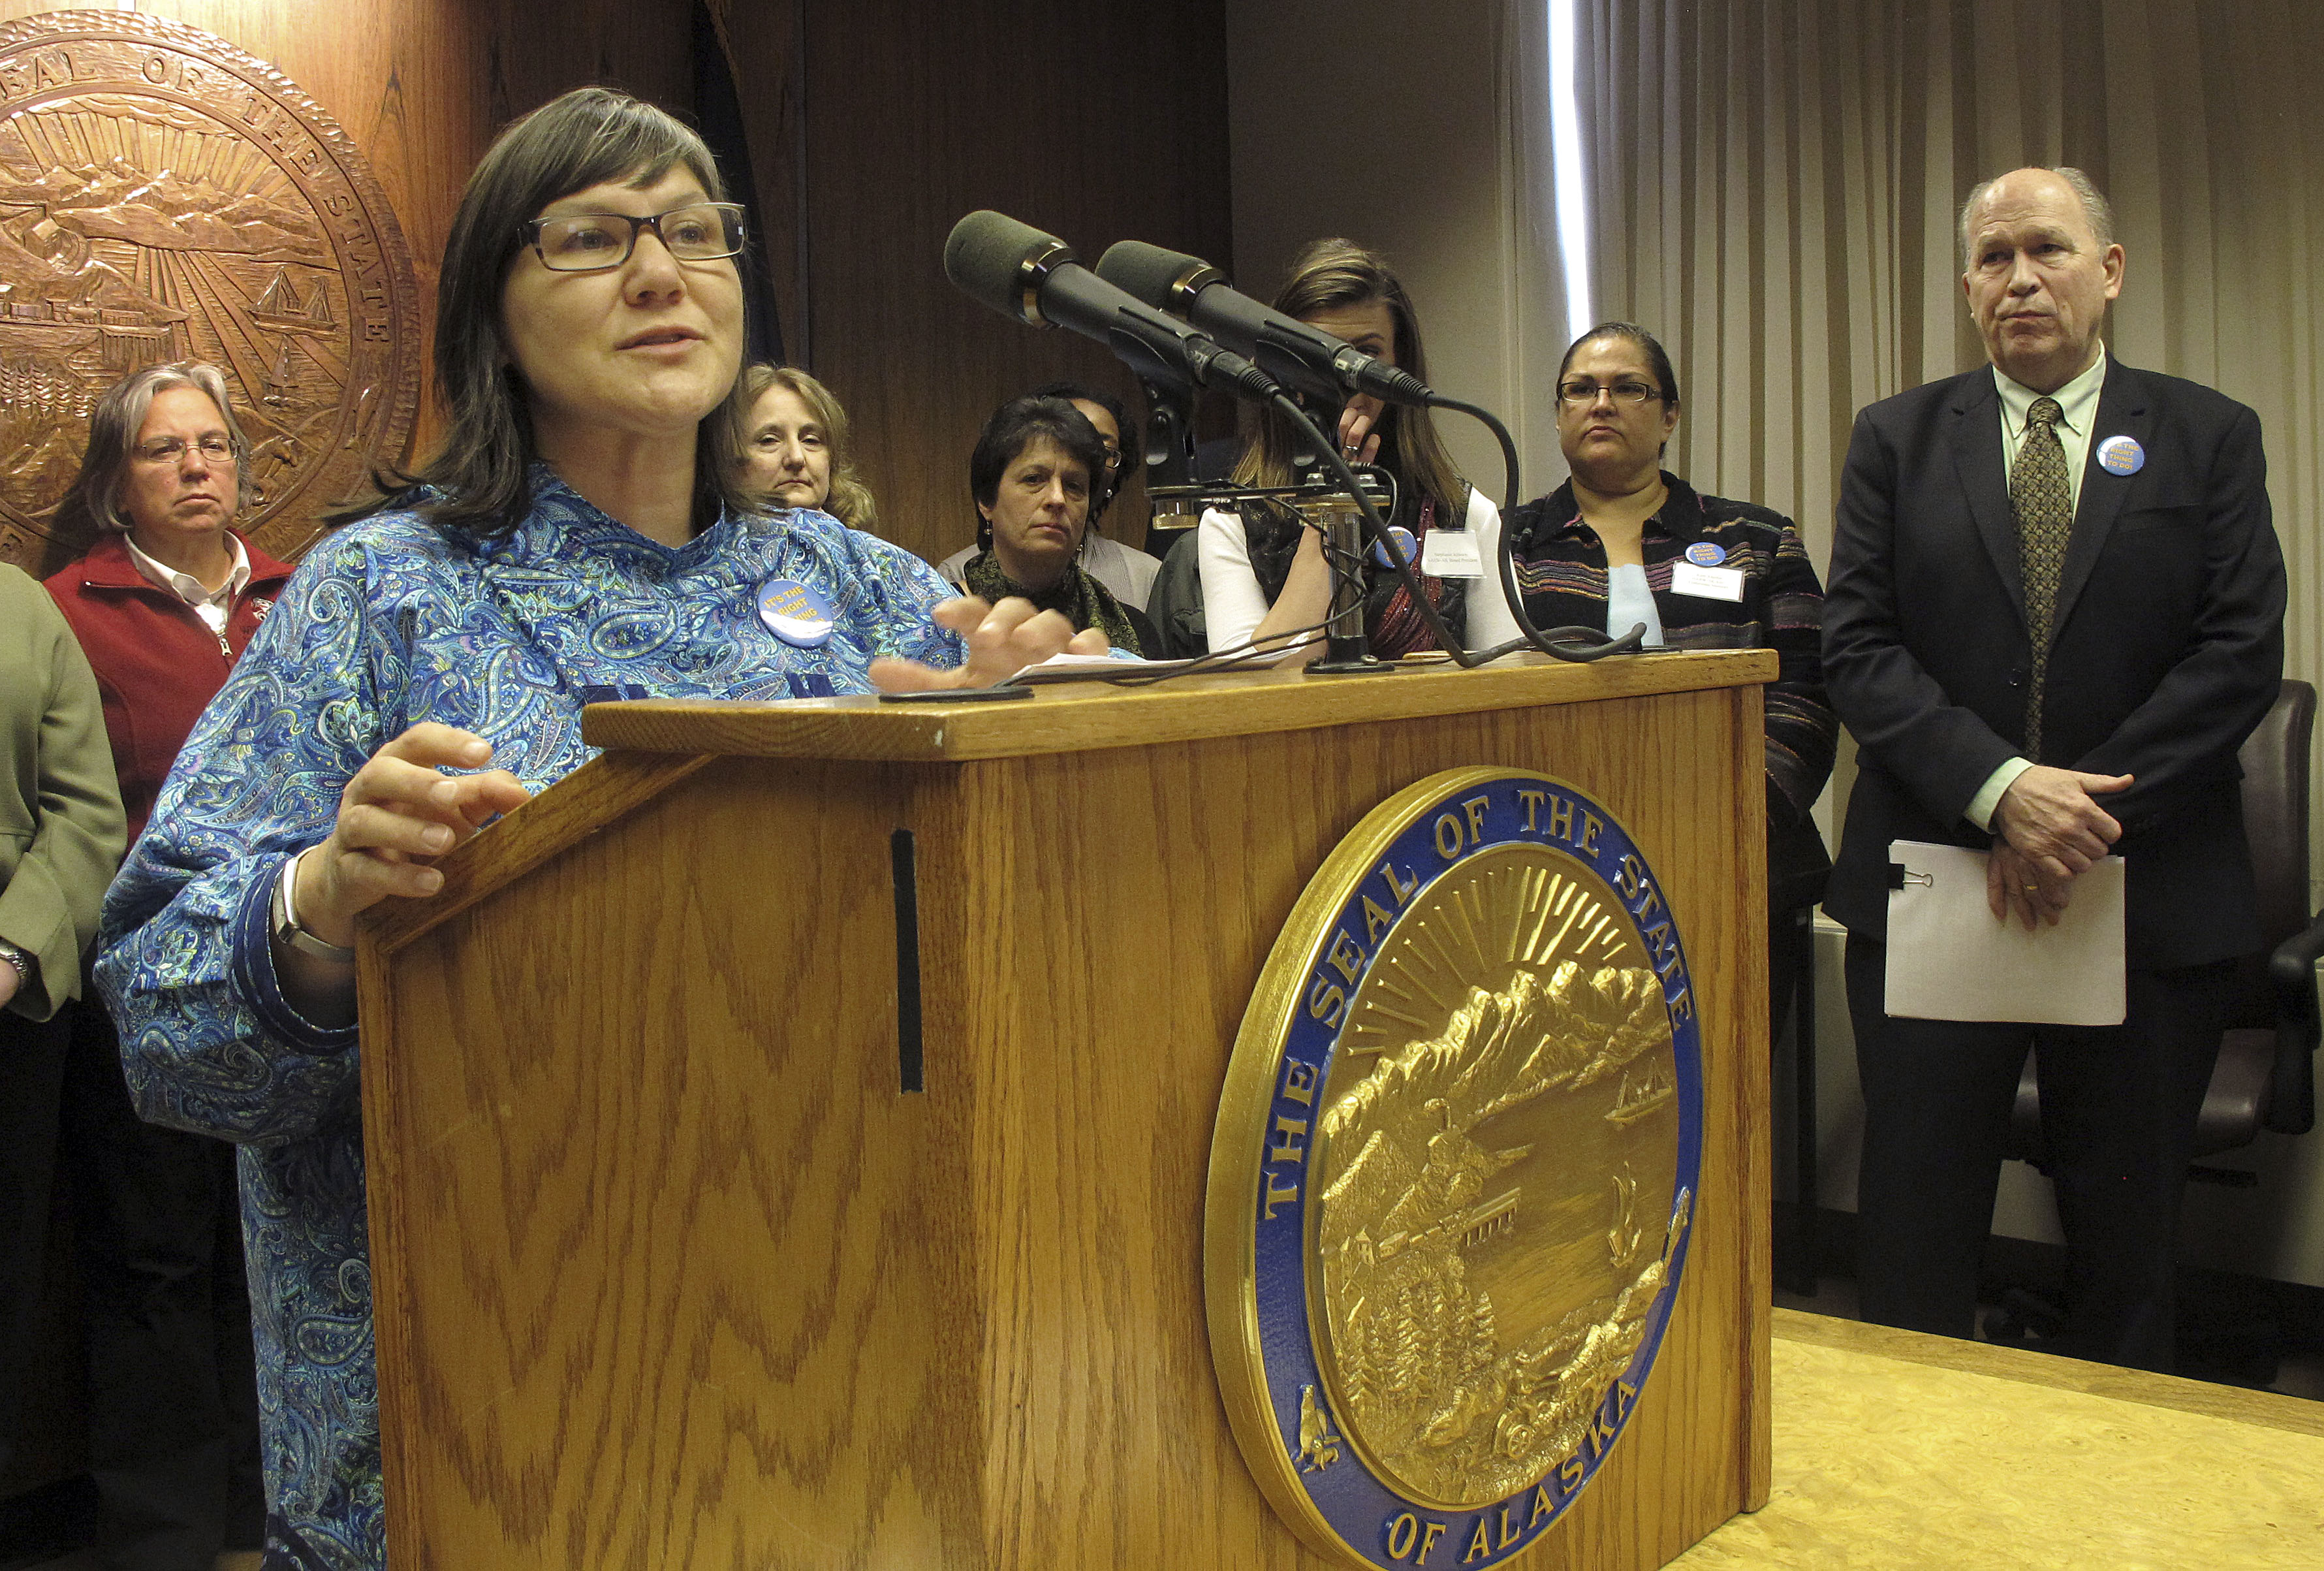 State Health Commissioner Valerie Davidson, left, speaks with reporters during a news conference as Gov. Bill Walker, far right, watches on Tuesday, March 17, 2015, in Juneau, Alaska. Walker announced plans to introduce legislation to reform and expand the Medicaid system in Alaska.